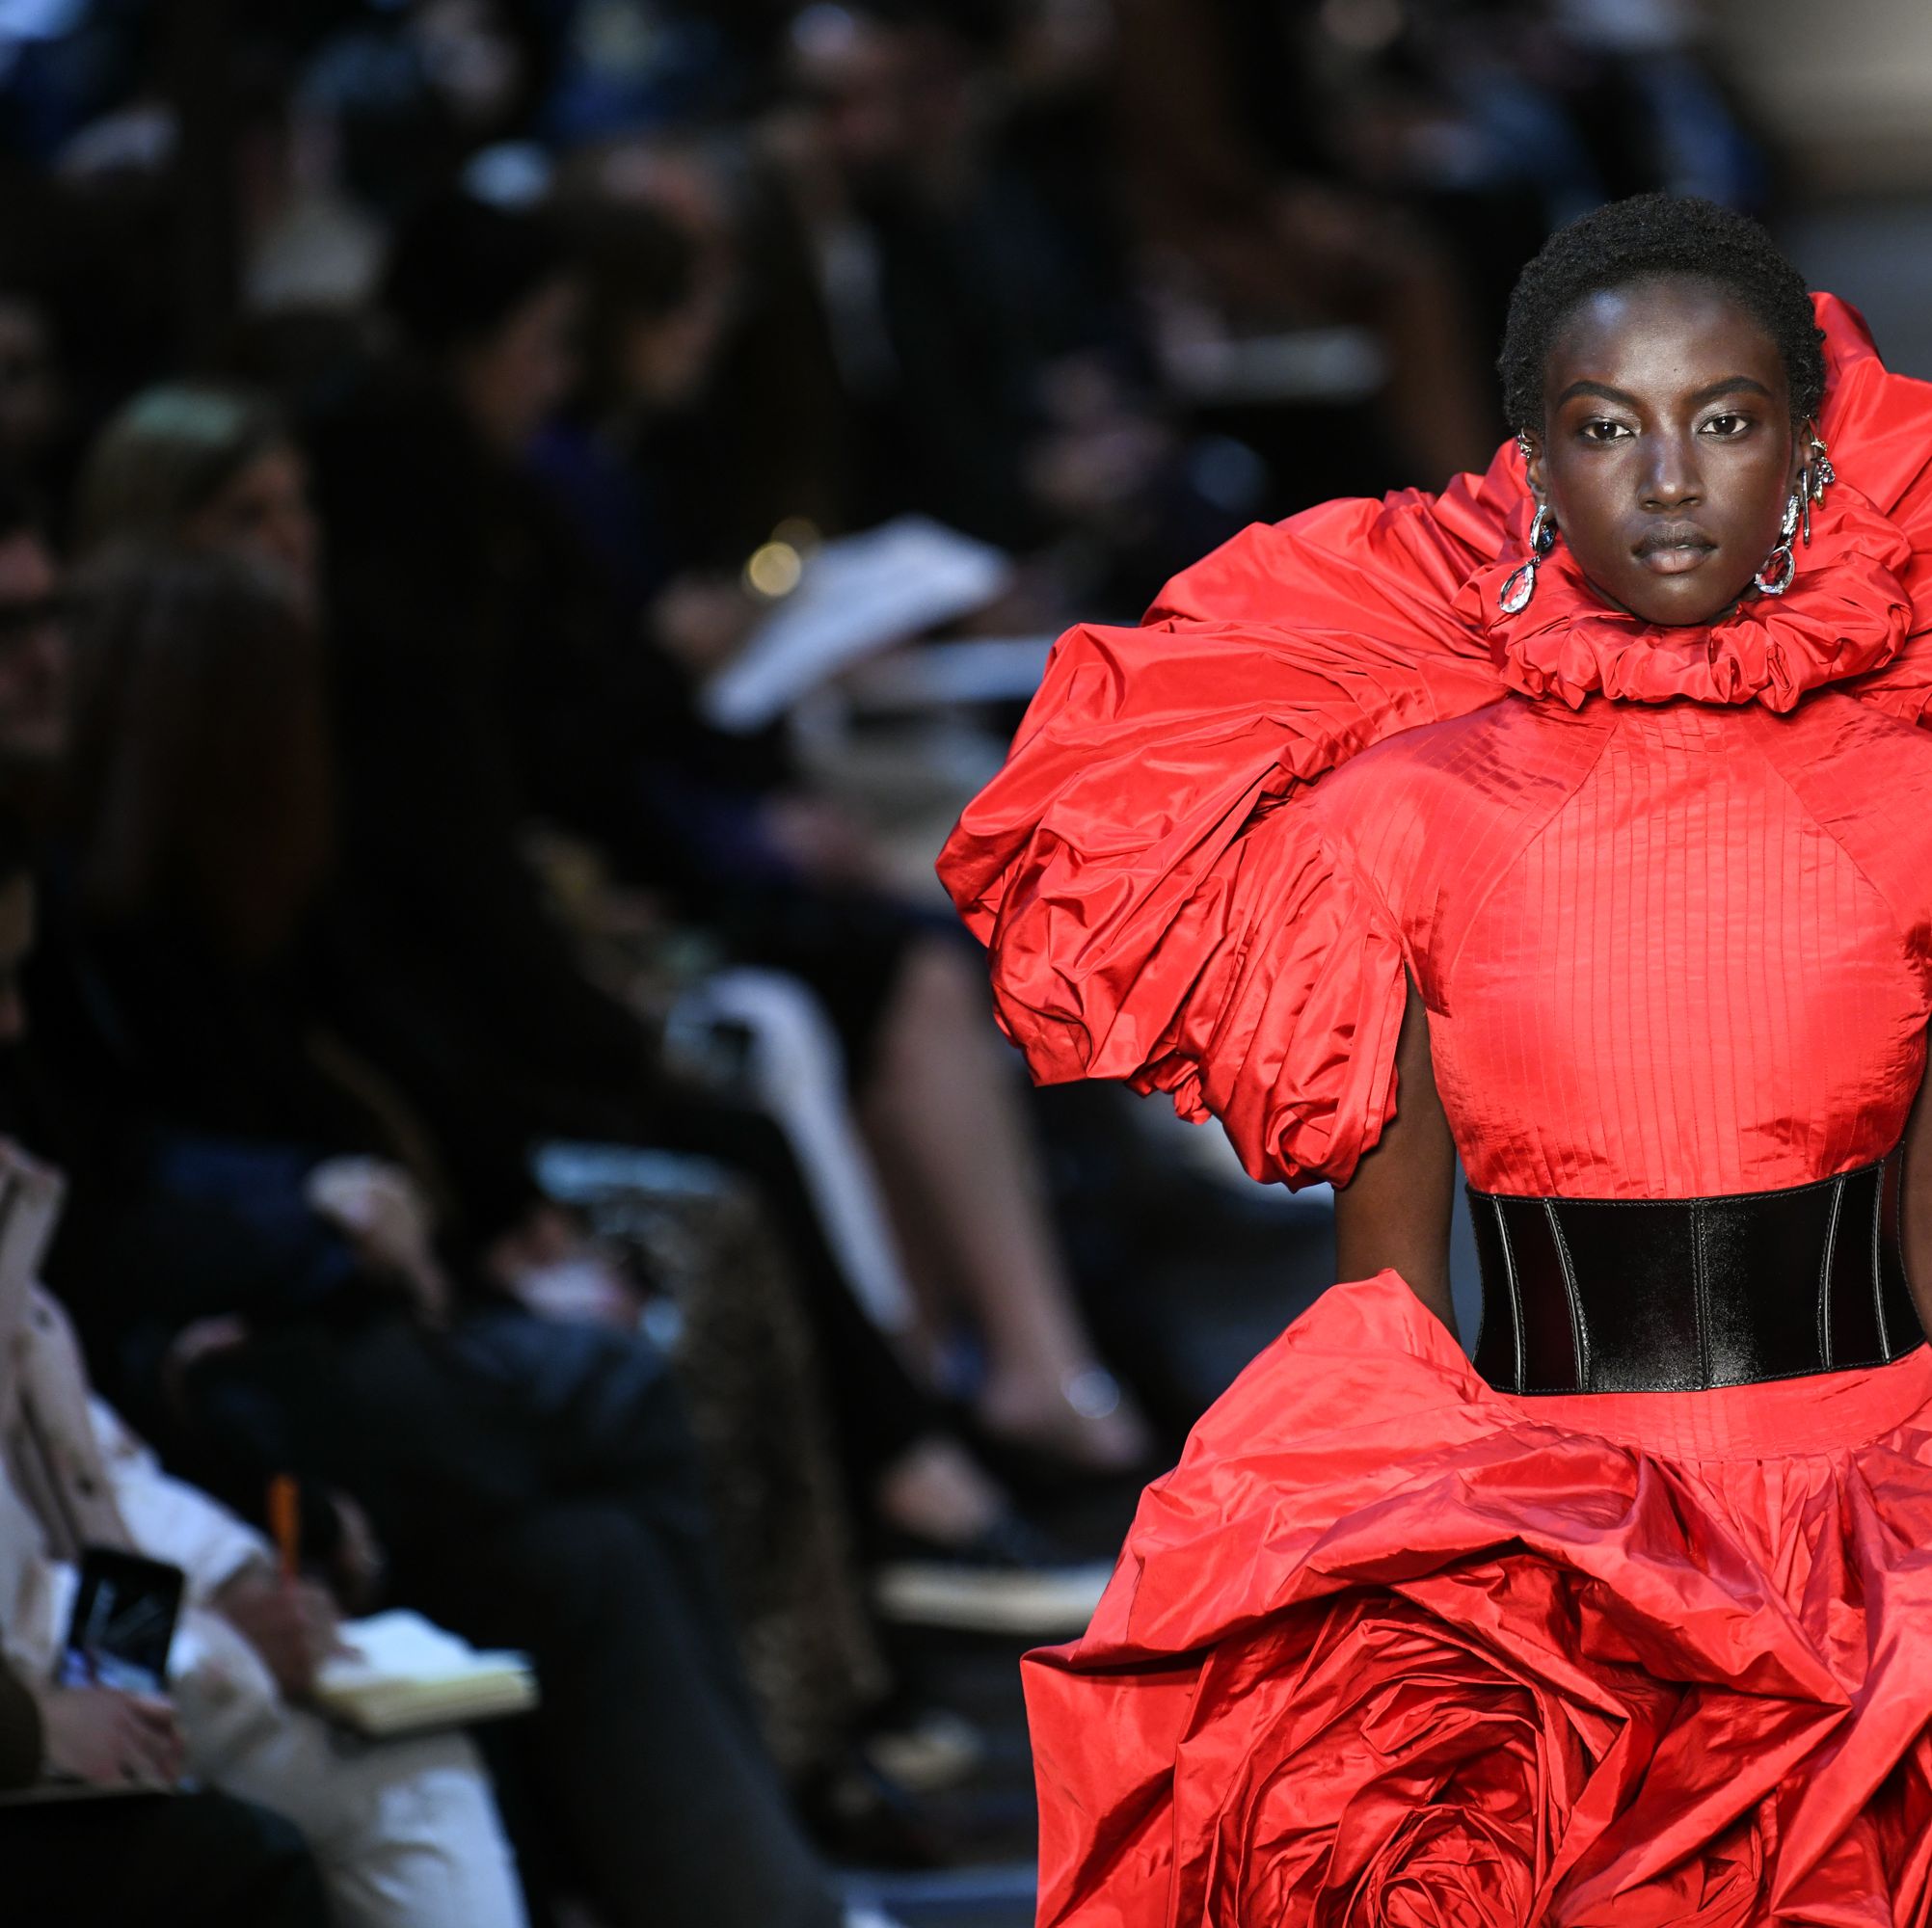 See Every Look From Alexander McQueen's Spring 2020 Collection